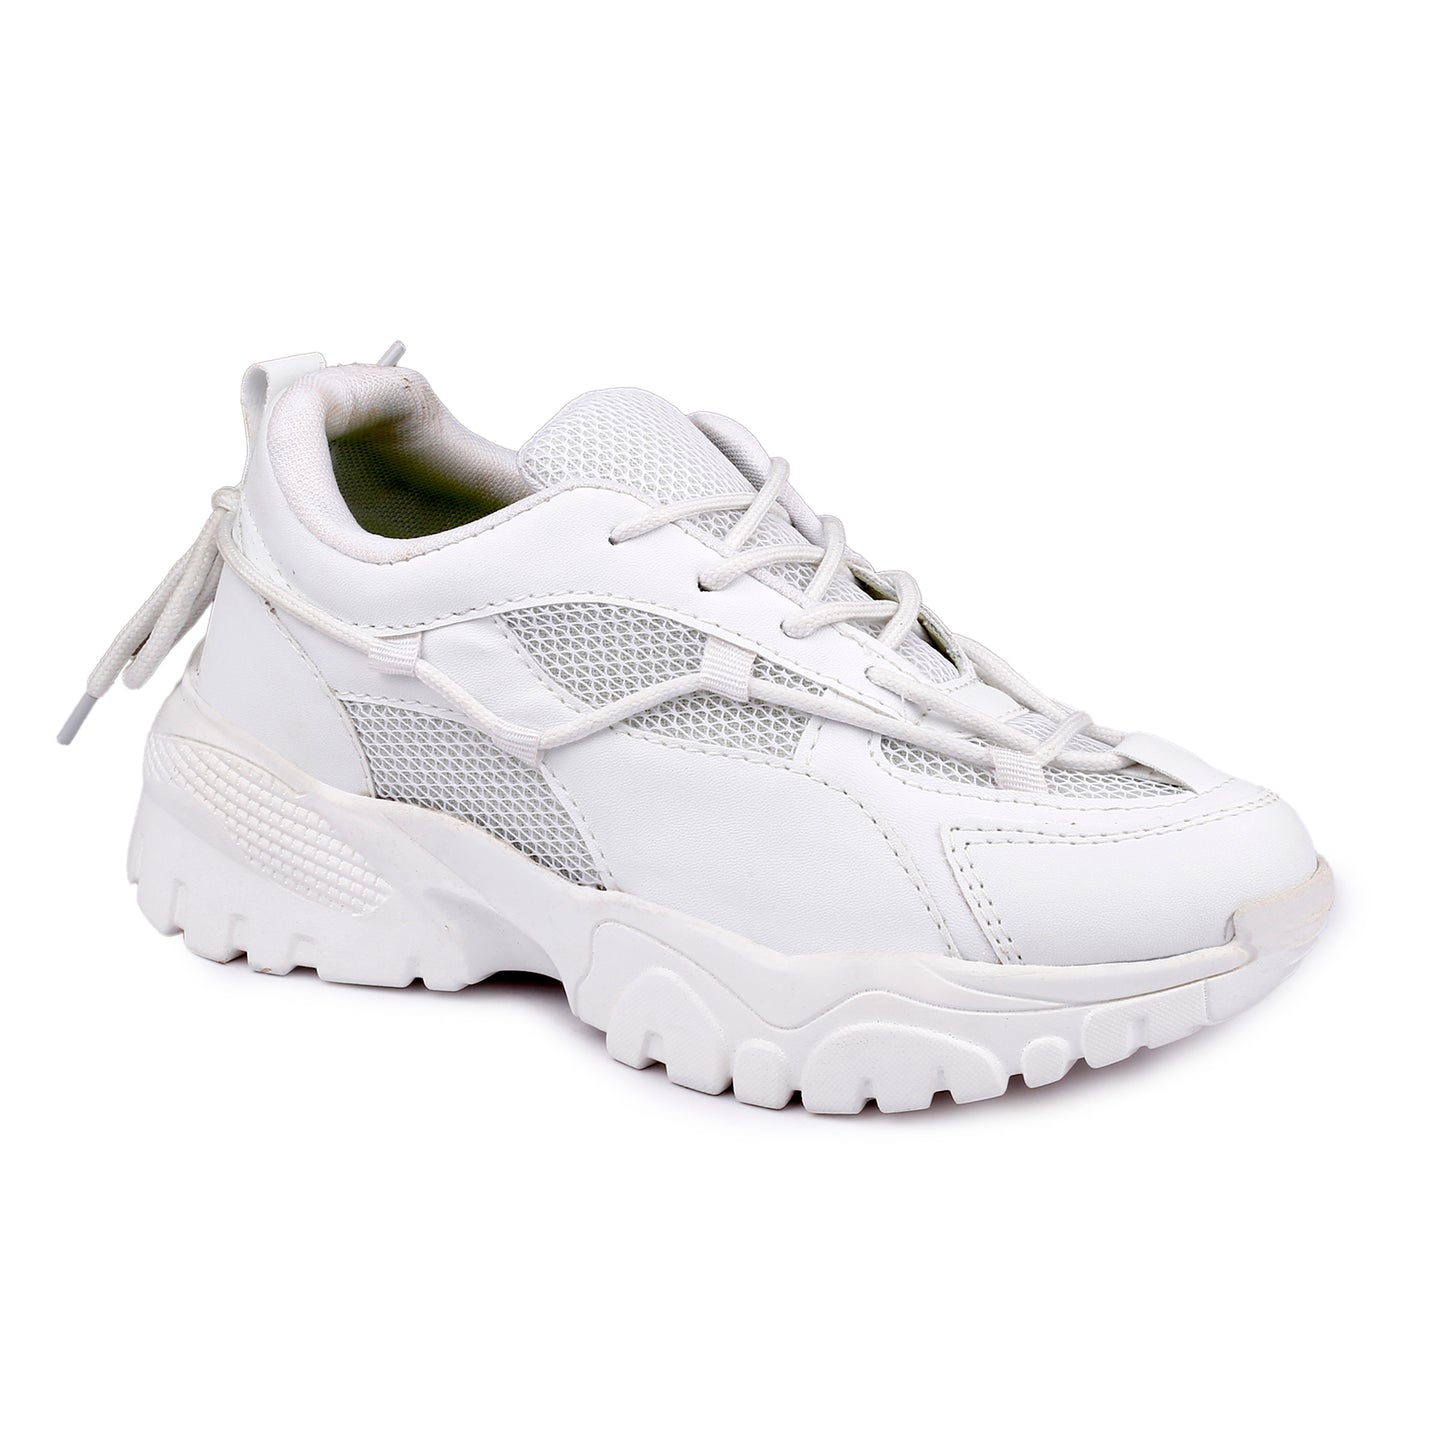 BXXY Synthetic Leather Lace Up Casual Sneaker Shoes for Women and Girls